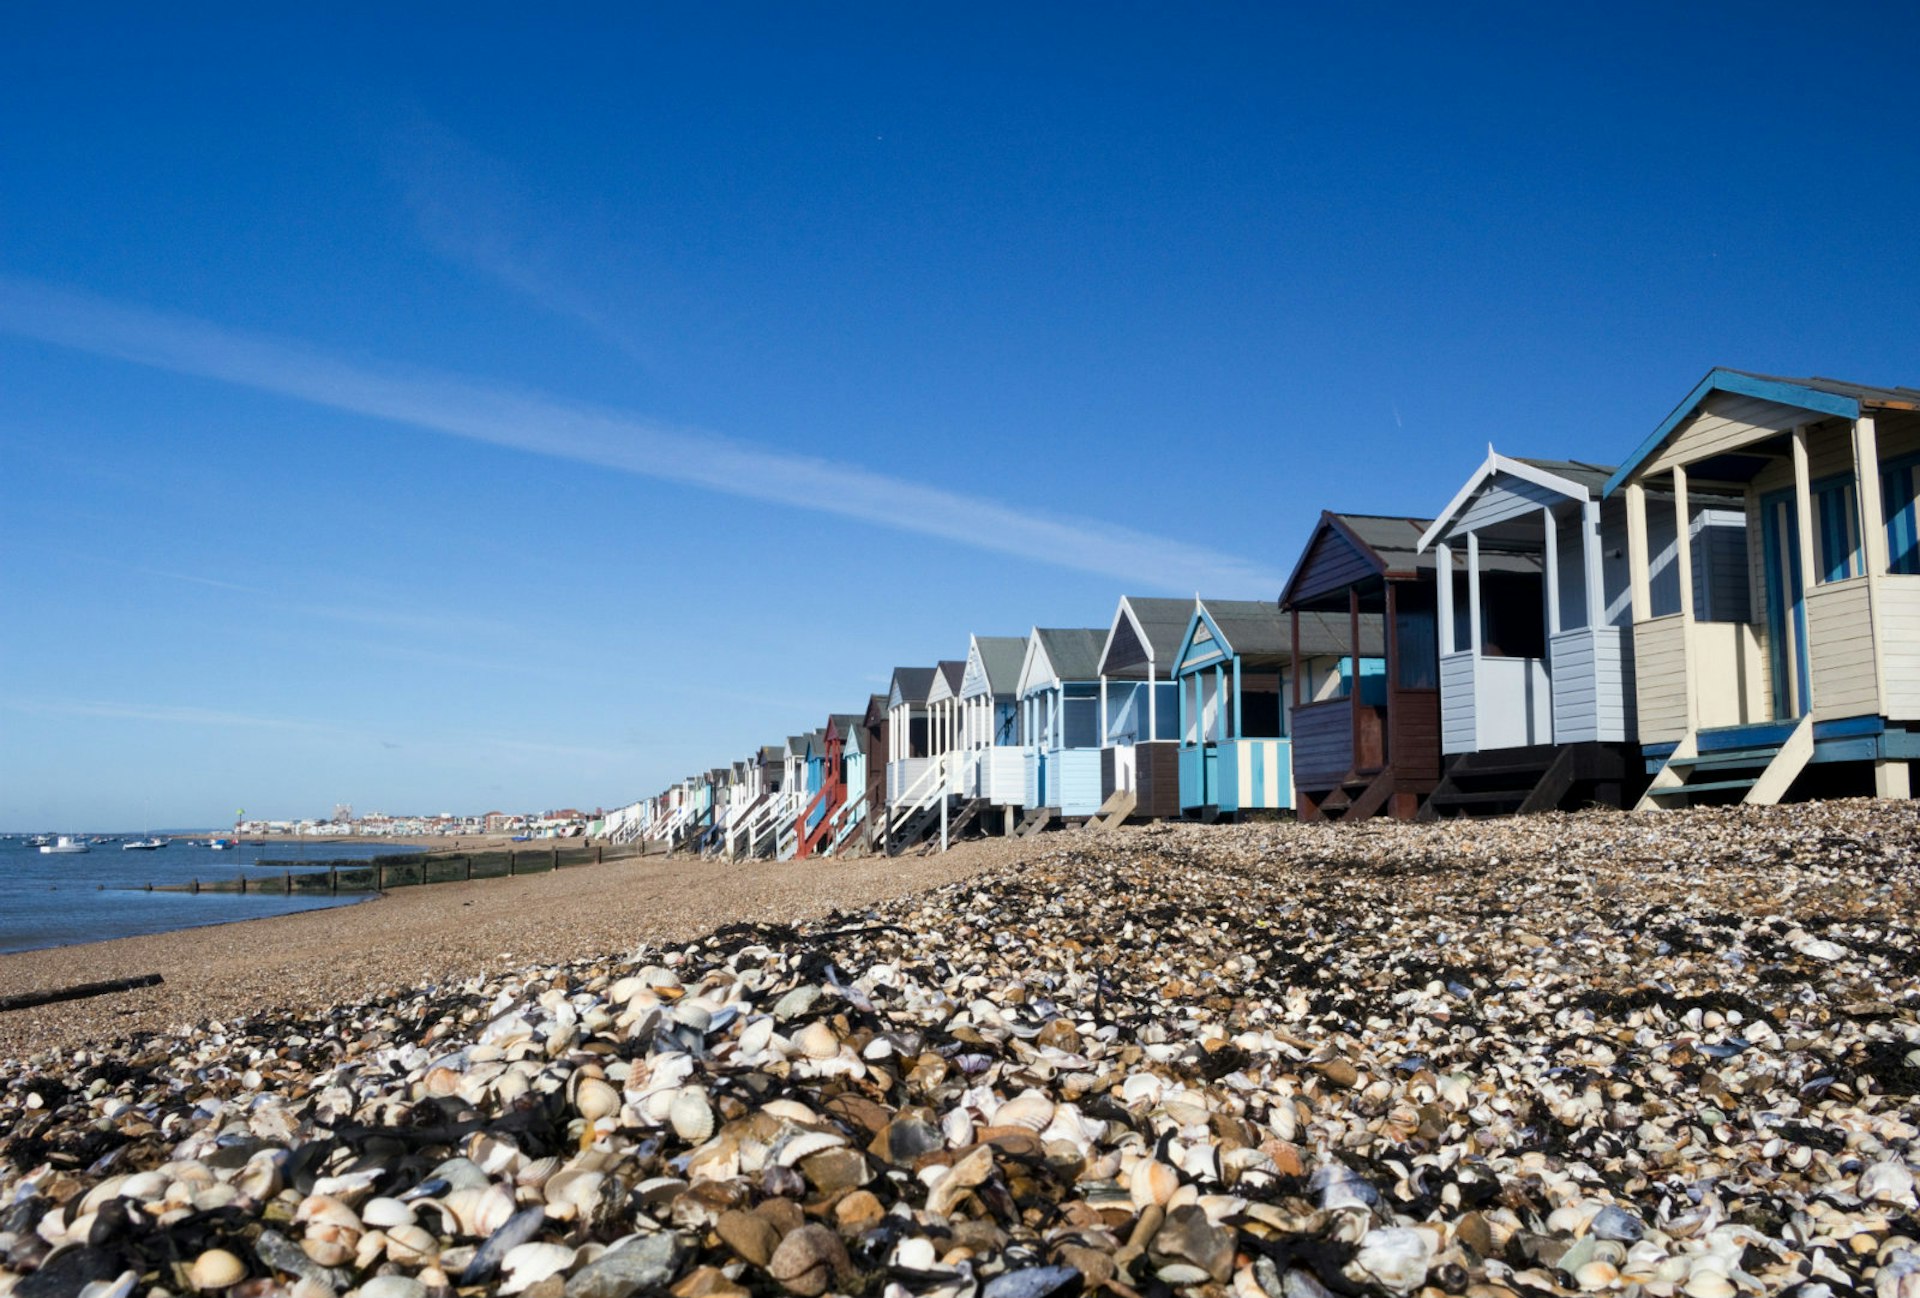 British seaside town Southend was a must for Frank’s latest tour schedule © Sue Chillingworth / Shutterstock